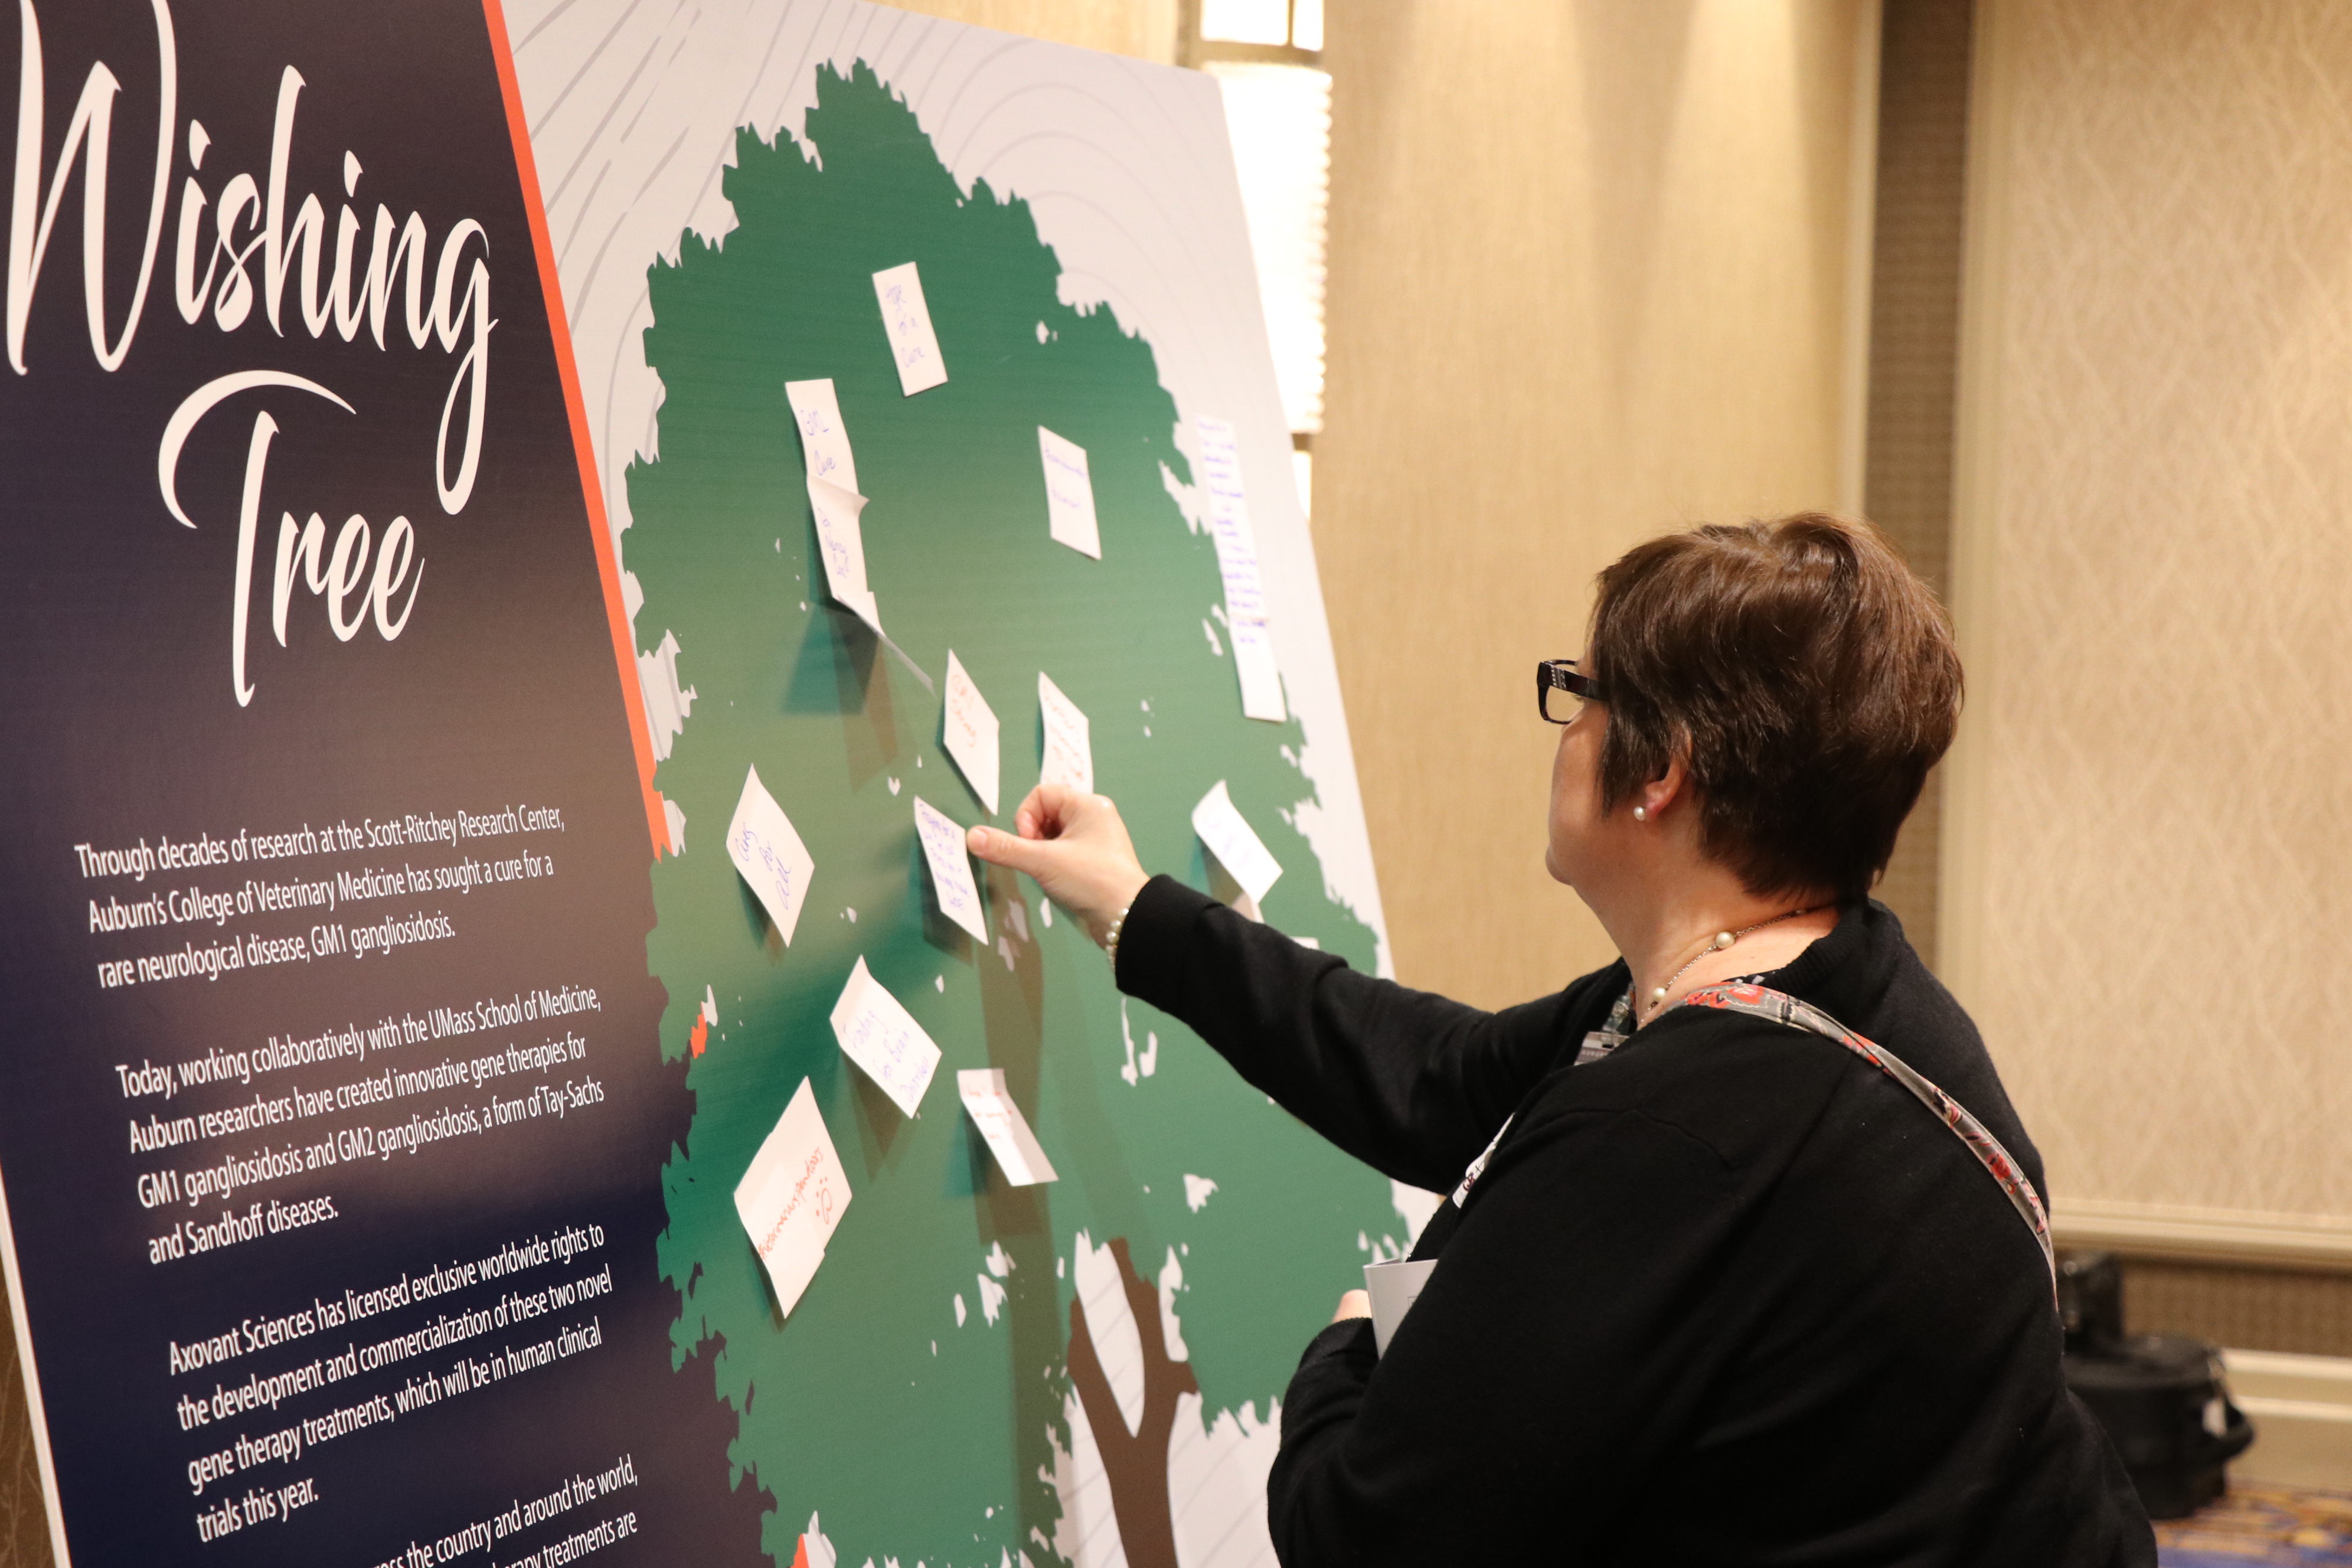 Attendees left messages of hope of the Auburn Wishing Tree.